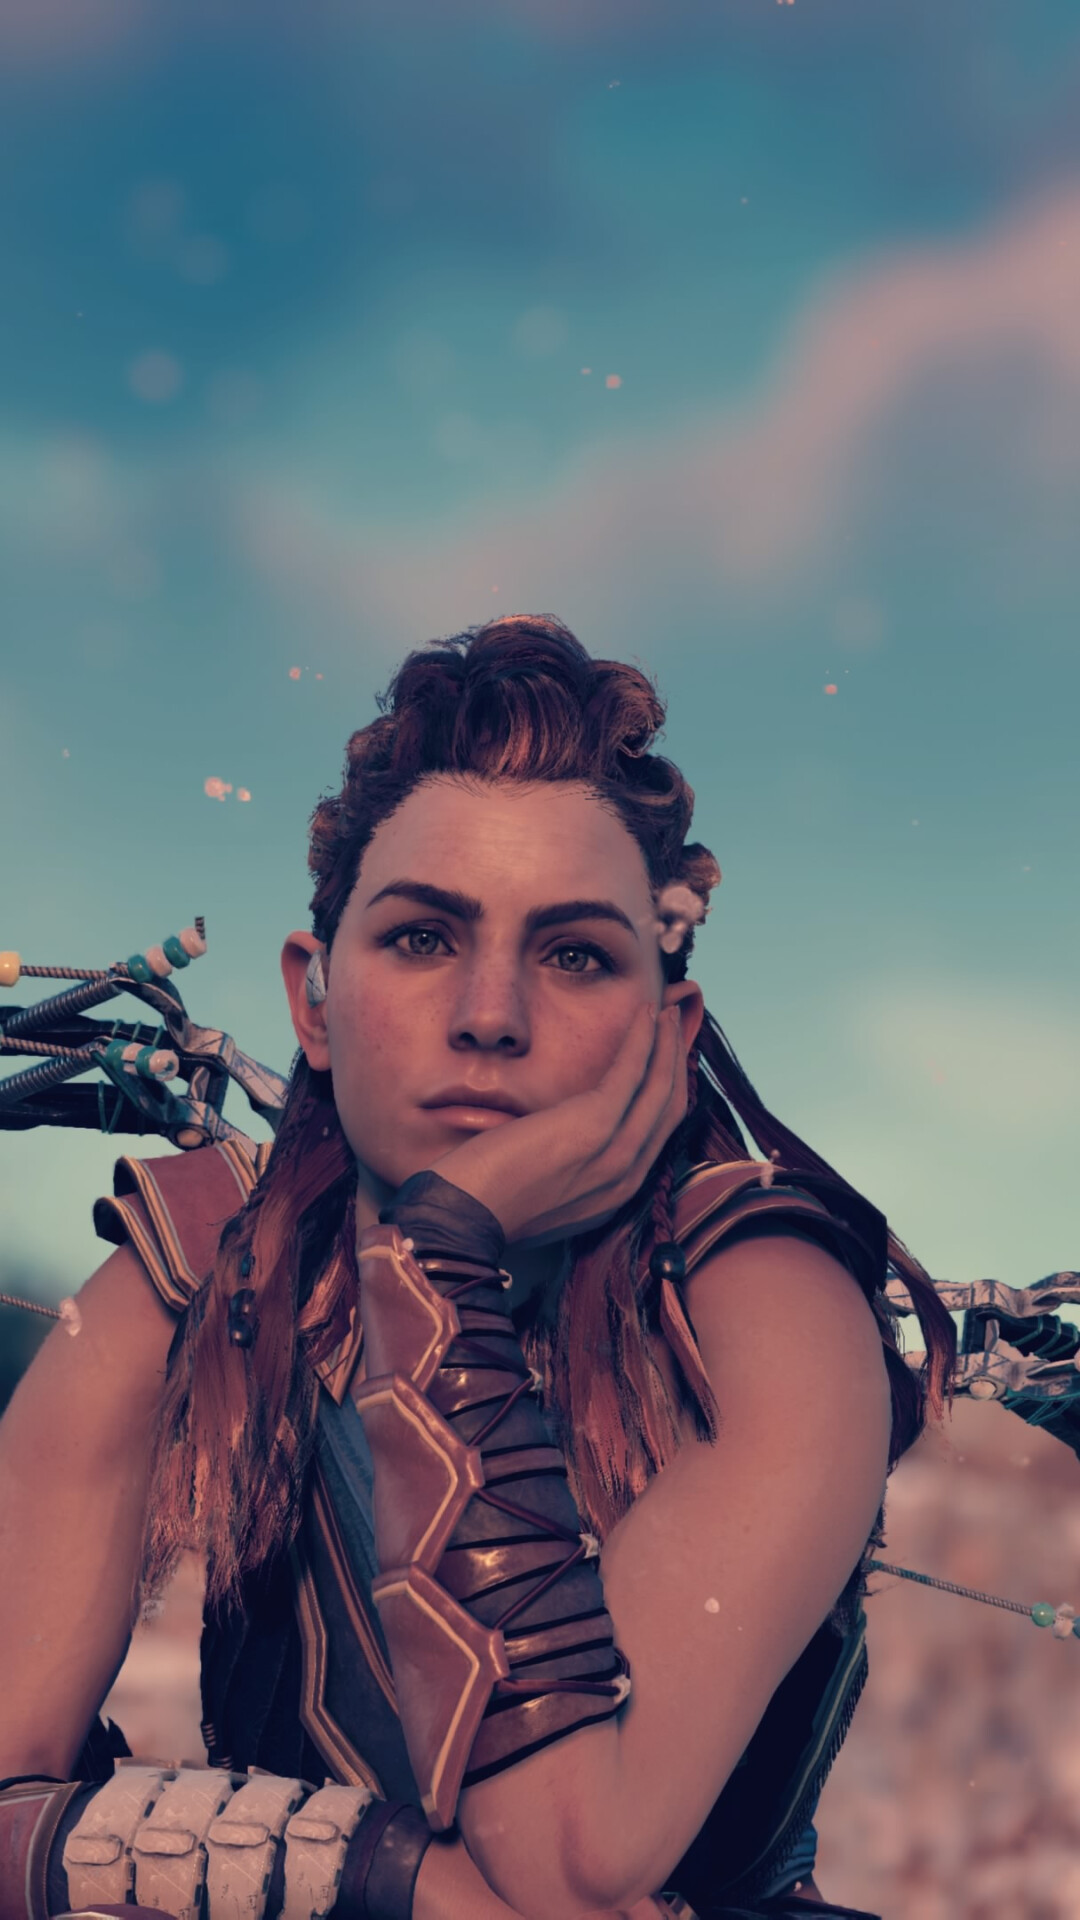 Horizon Zero Dawn: Aloy, A fictional character and protagonist of the 2017 video game HZD. 1080x1920 Full HD Wallpaper.